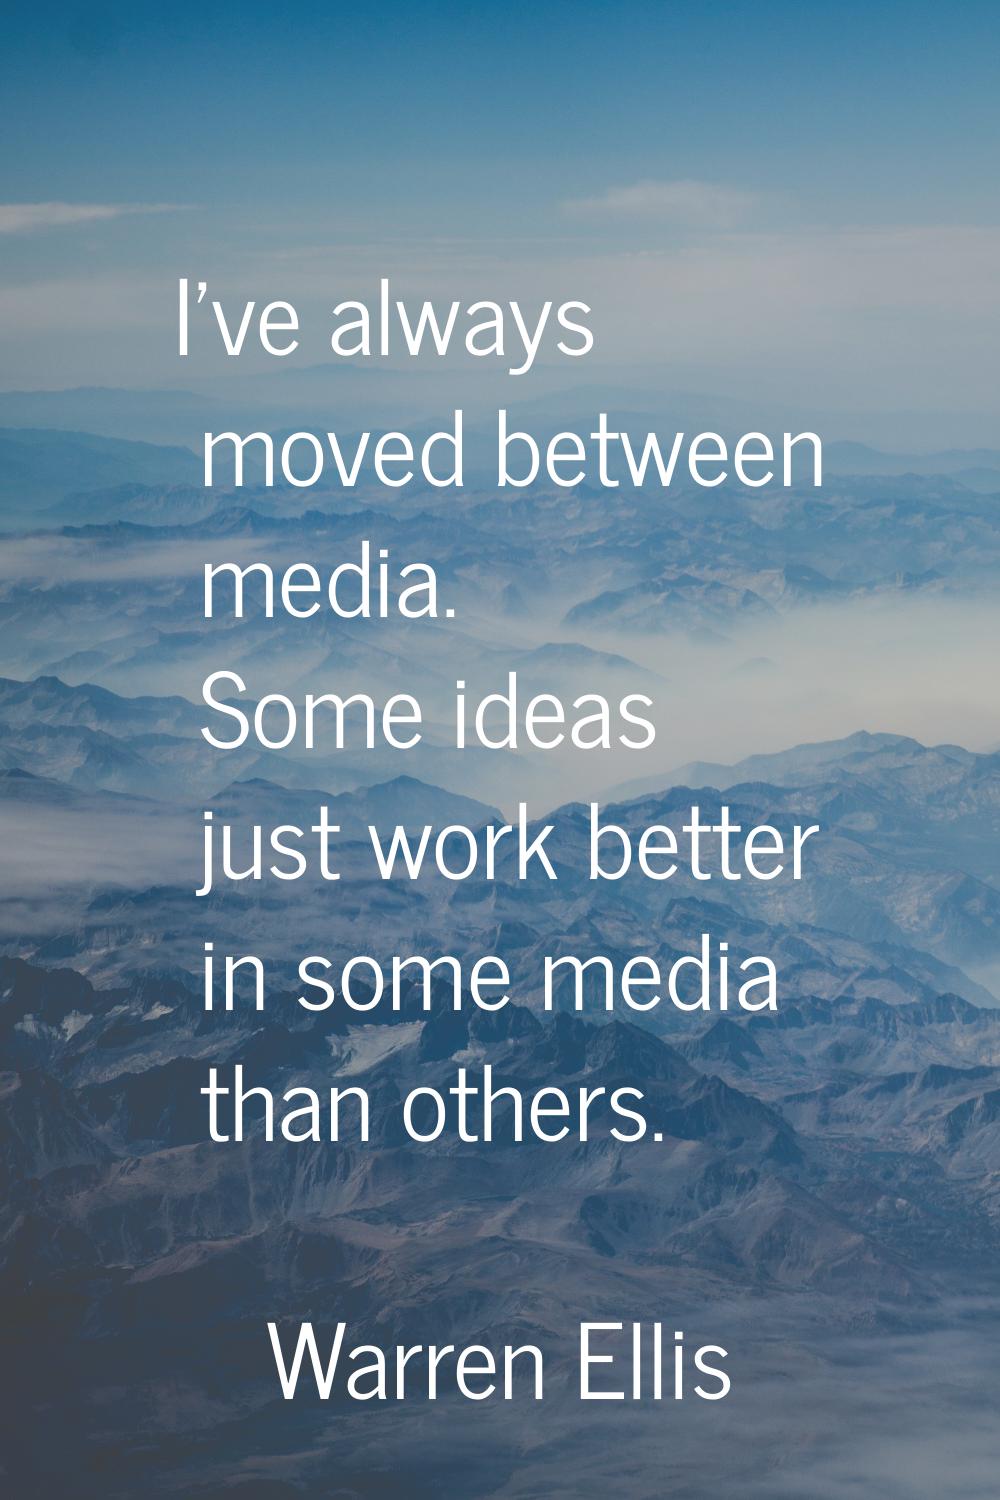 I've always moved between media. Some ideas just work better in some media than others.